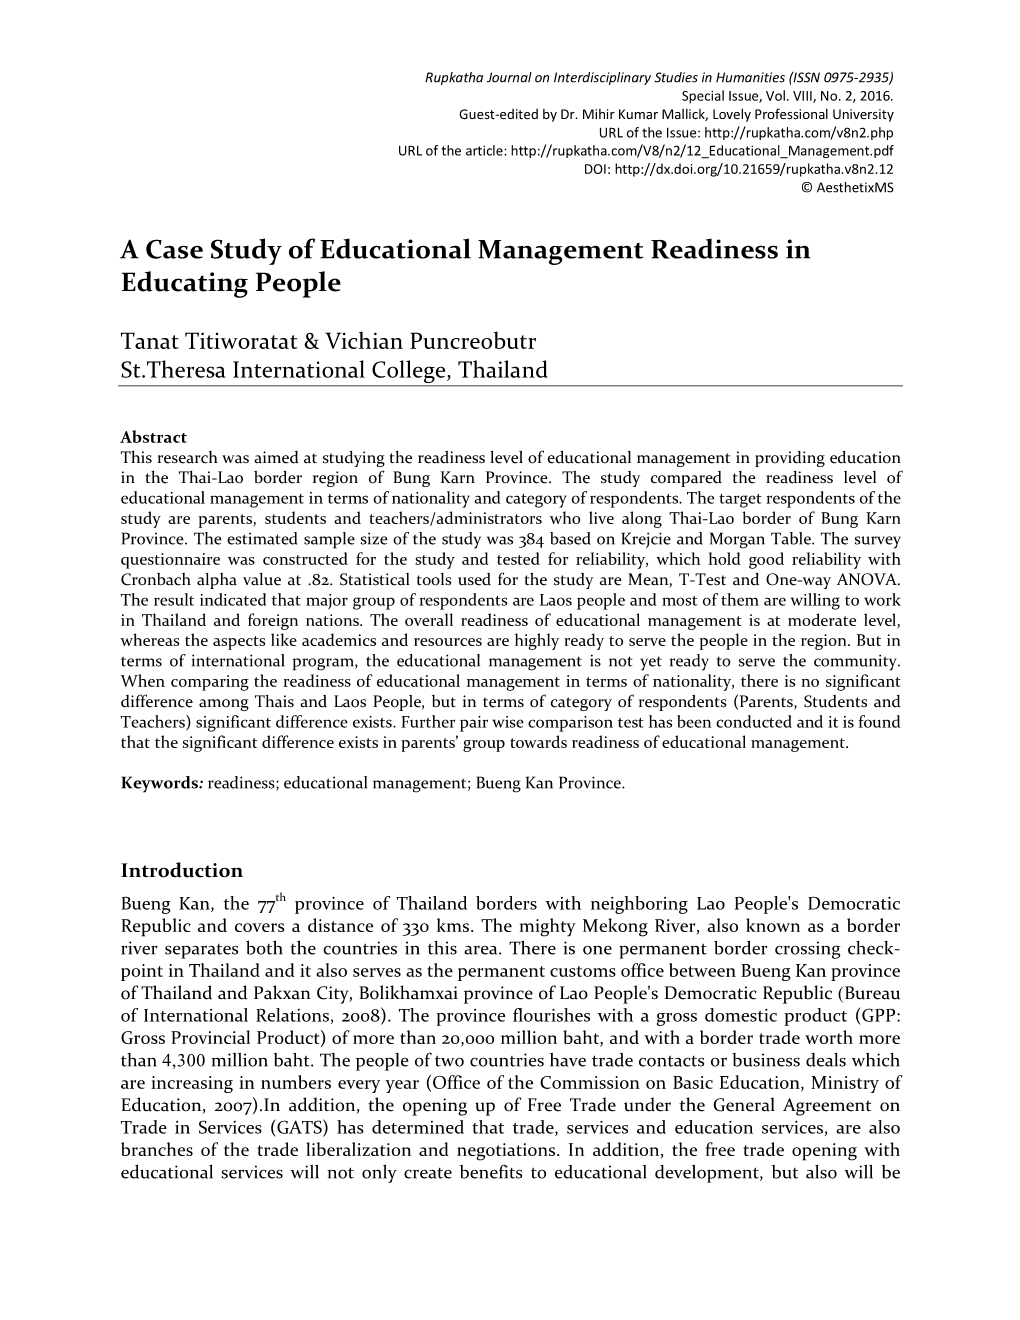 A Case Study of Educational Management Readiness in Educating People